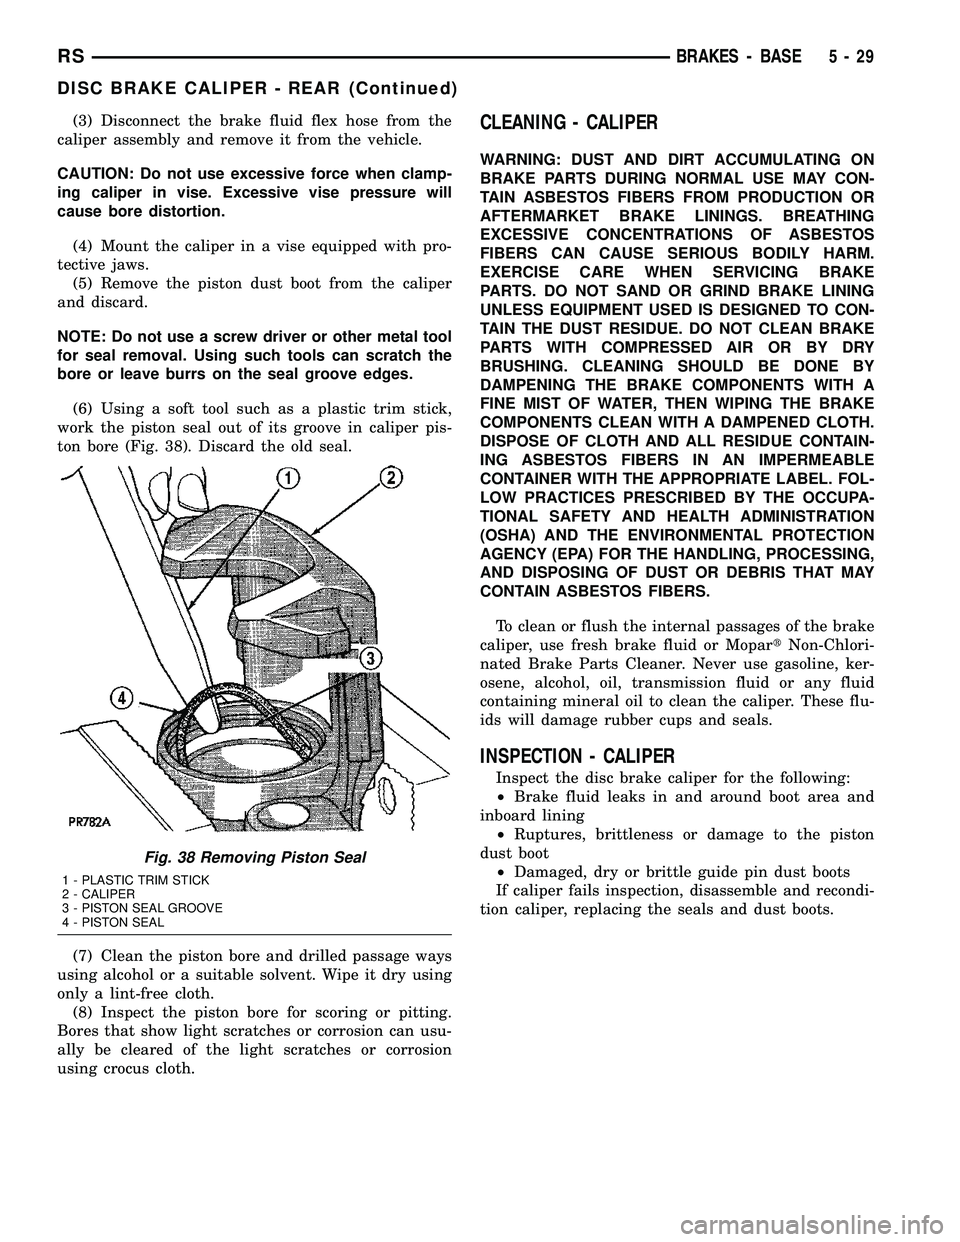 CHRYSLER VOYAGER 2005  Service Manual (3) Disconnect the brake fluid flex hose from the
caliper assembly and remove it from the vehicle.
CAUTION: Do not use excessive force when clamp-
ing caliper in vise. Excessive vise pressure will
cau